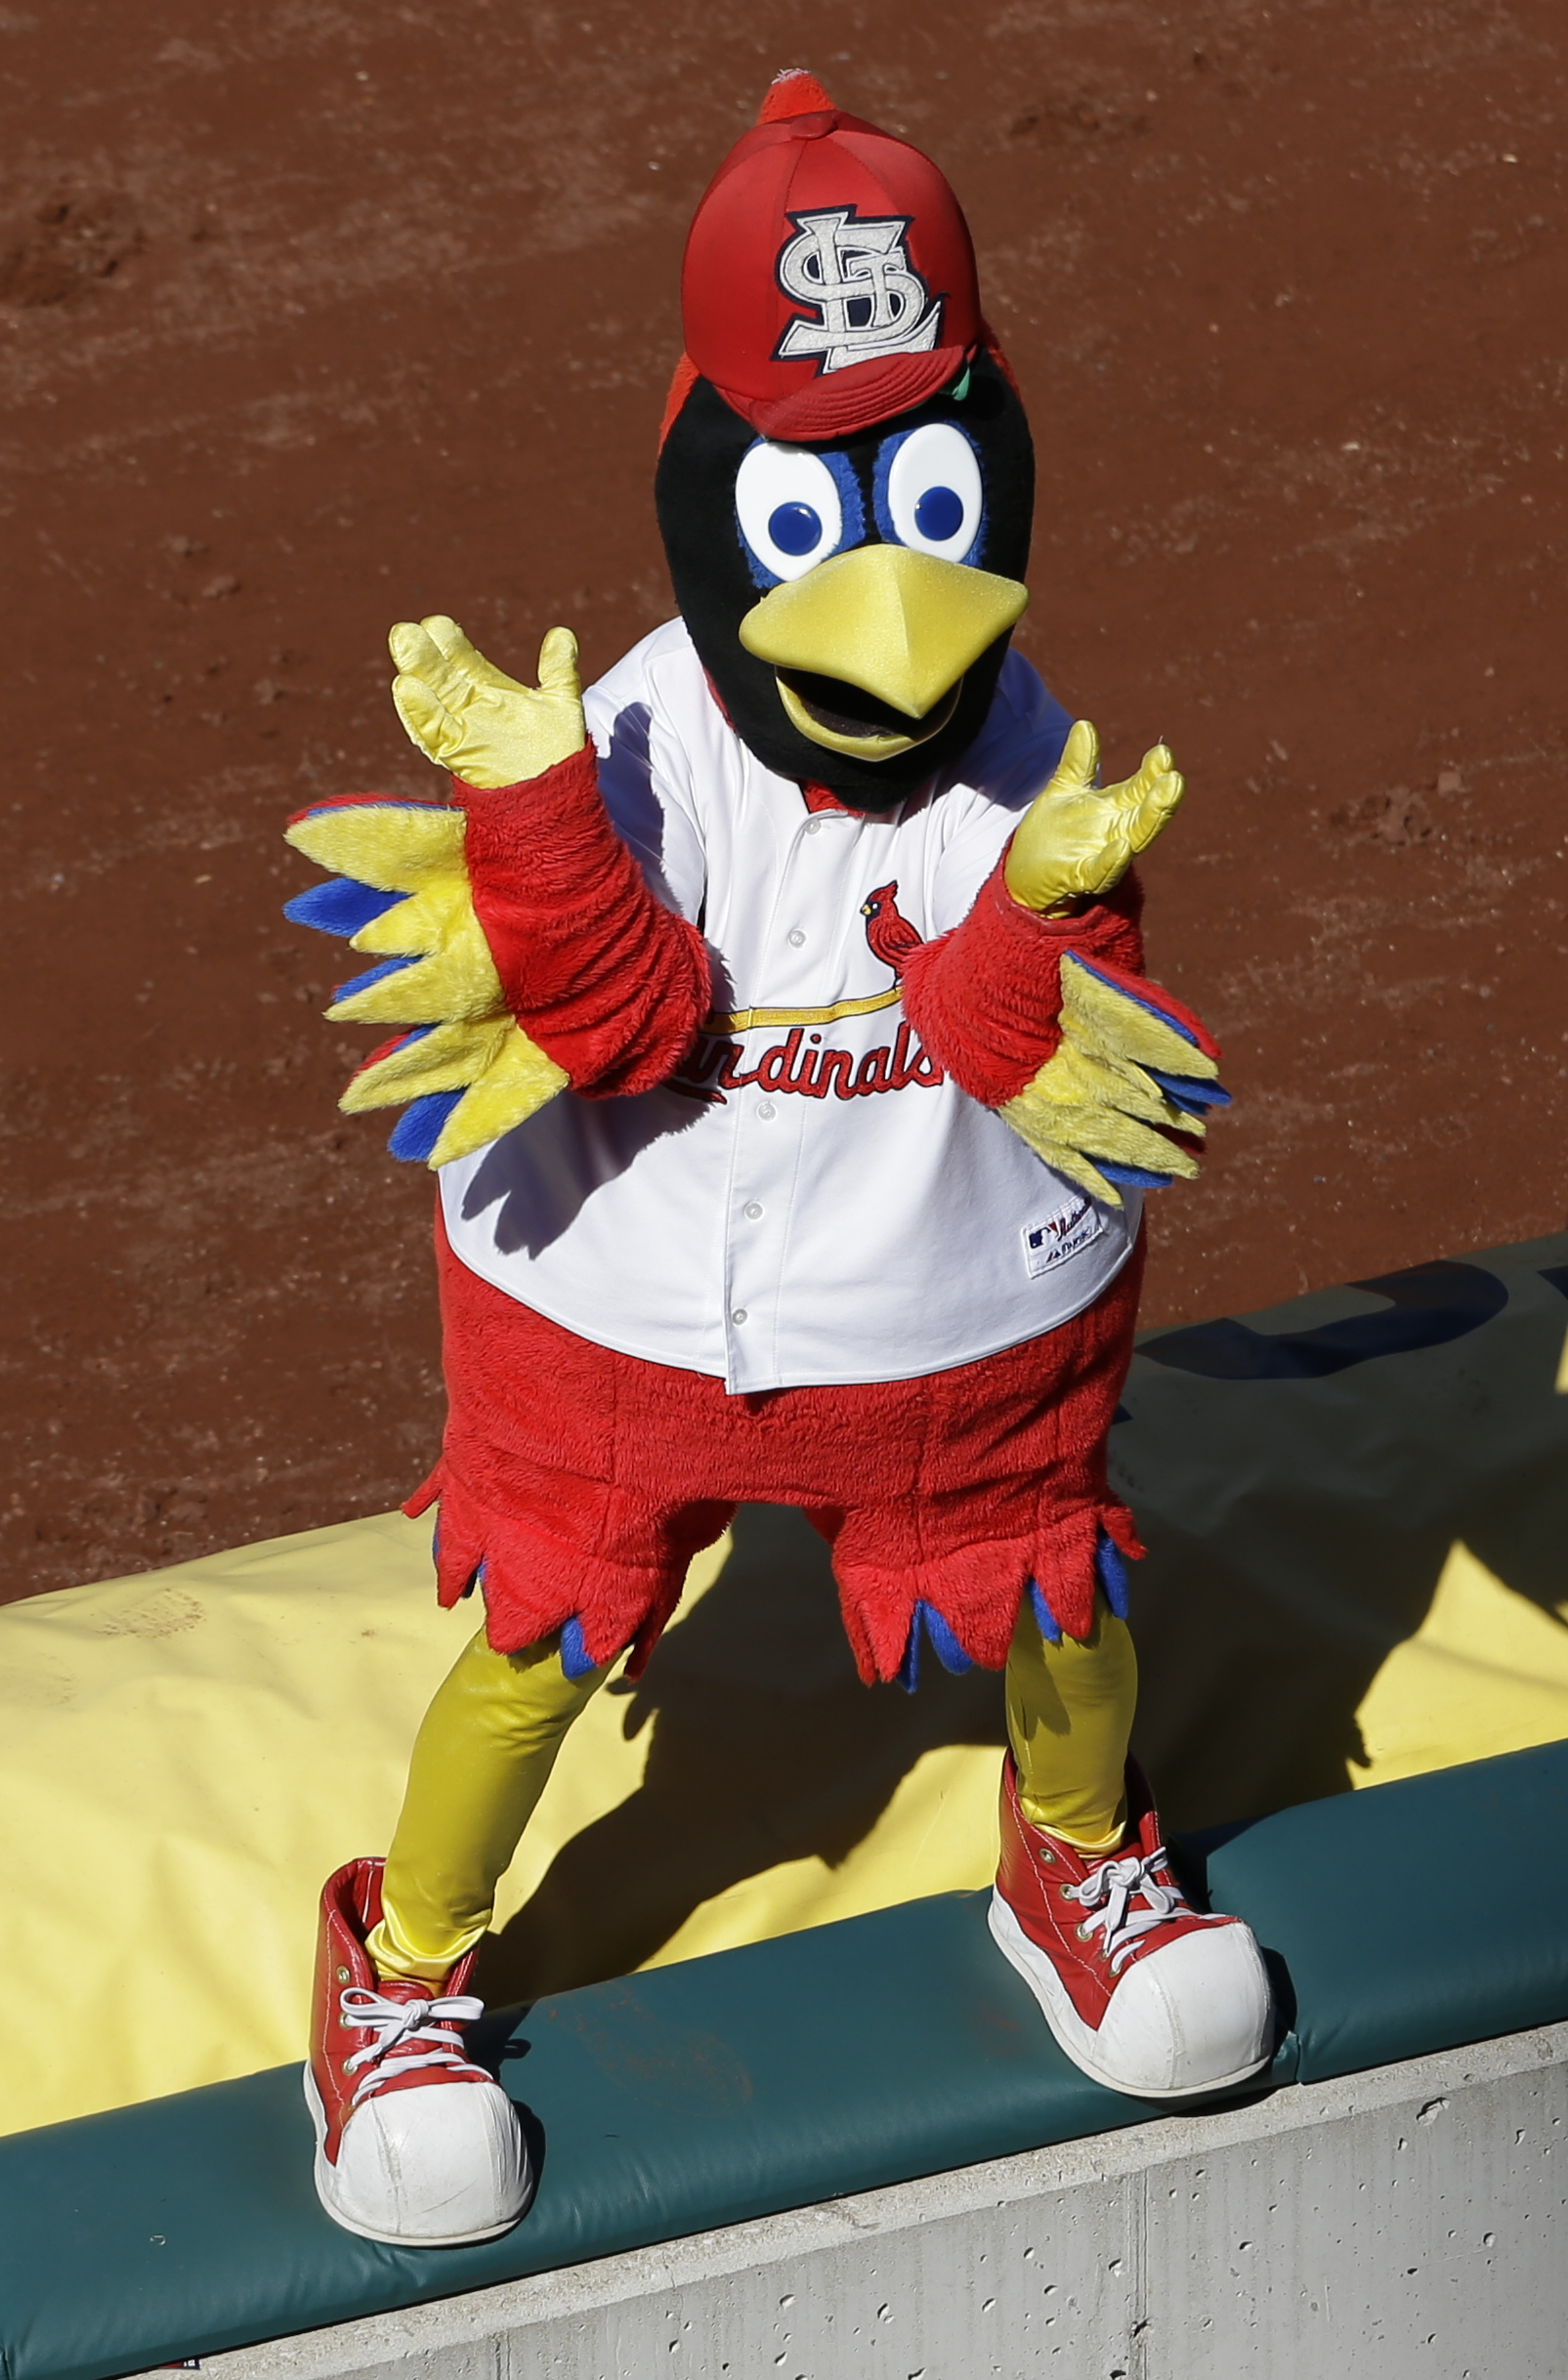 STL Cardinals Ask Cops To Remove 'Police Lives Matter' Photo Of Mascot -  TPM – Talking Points Memo